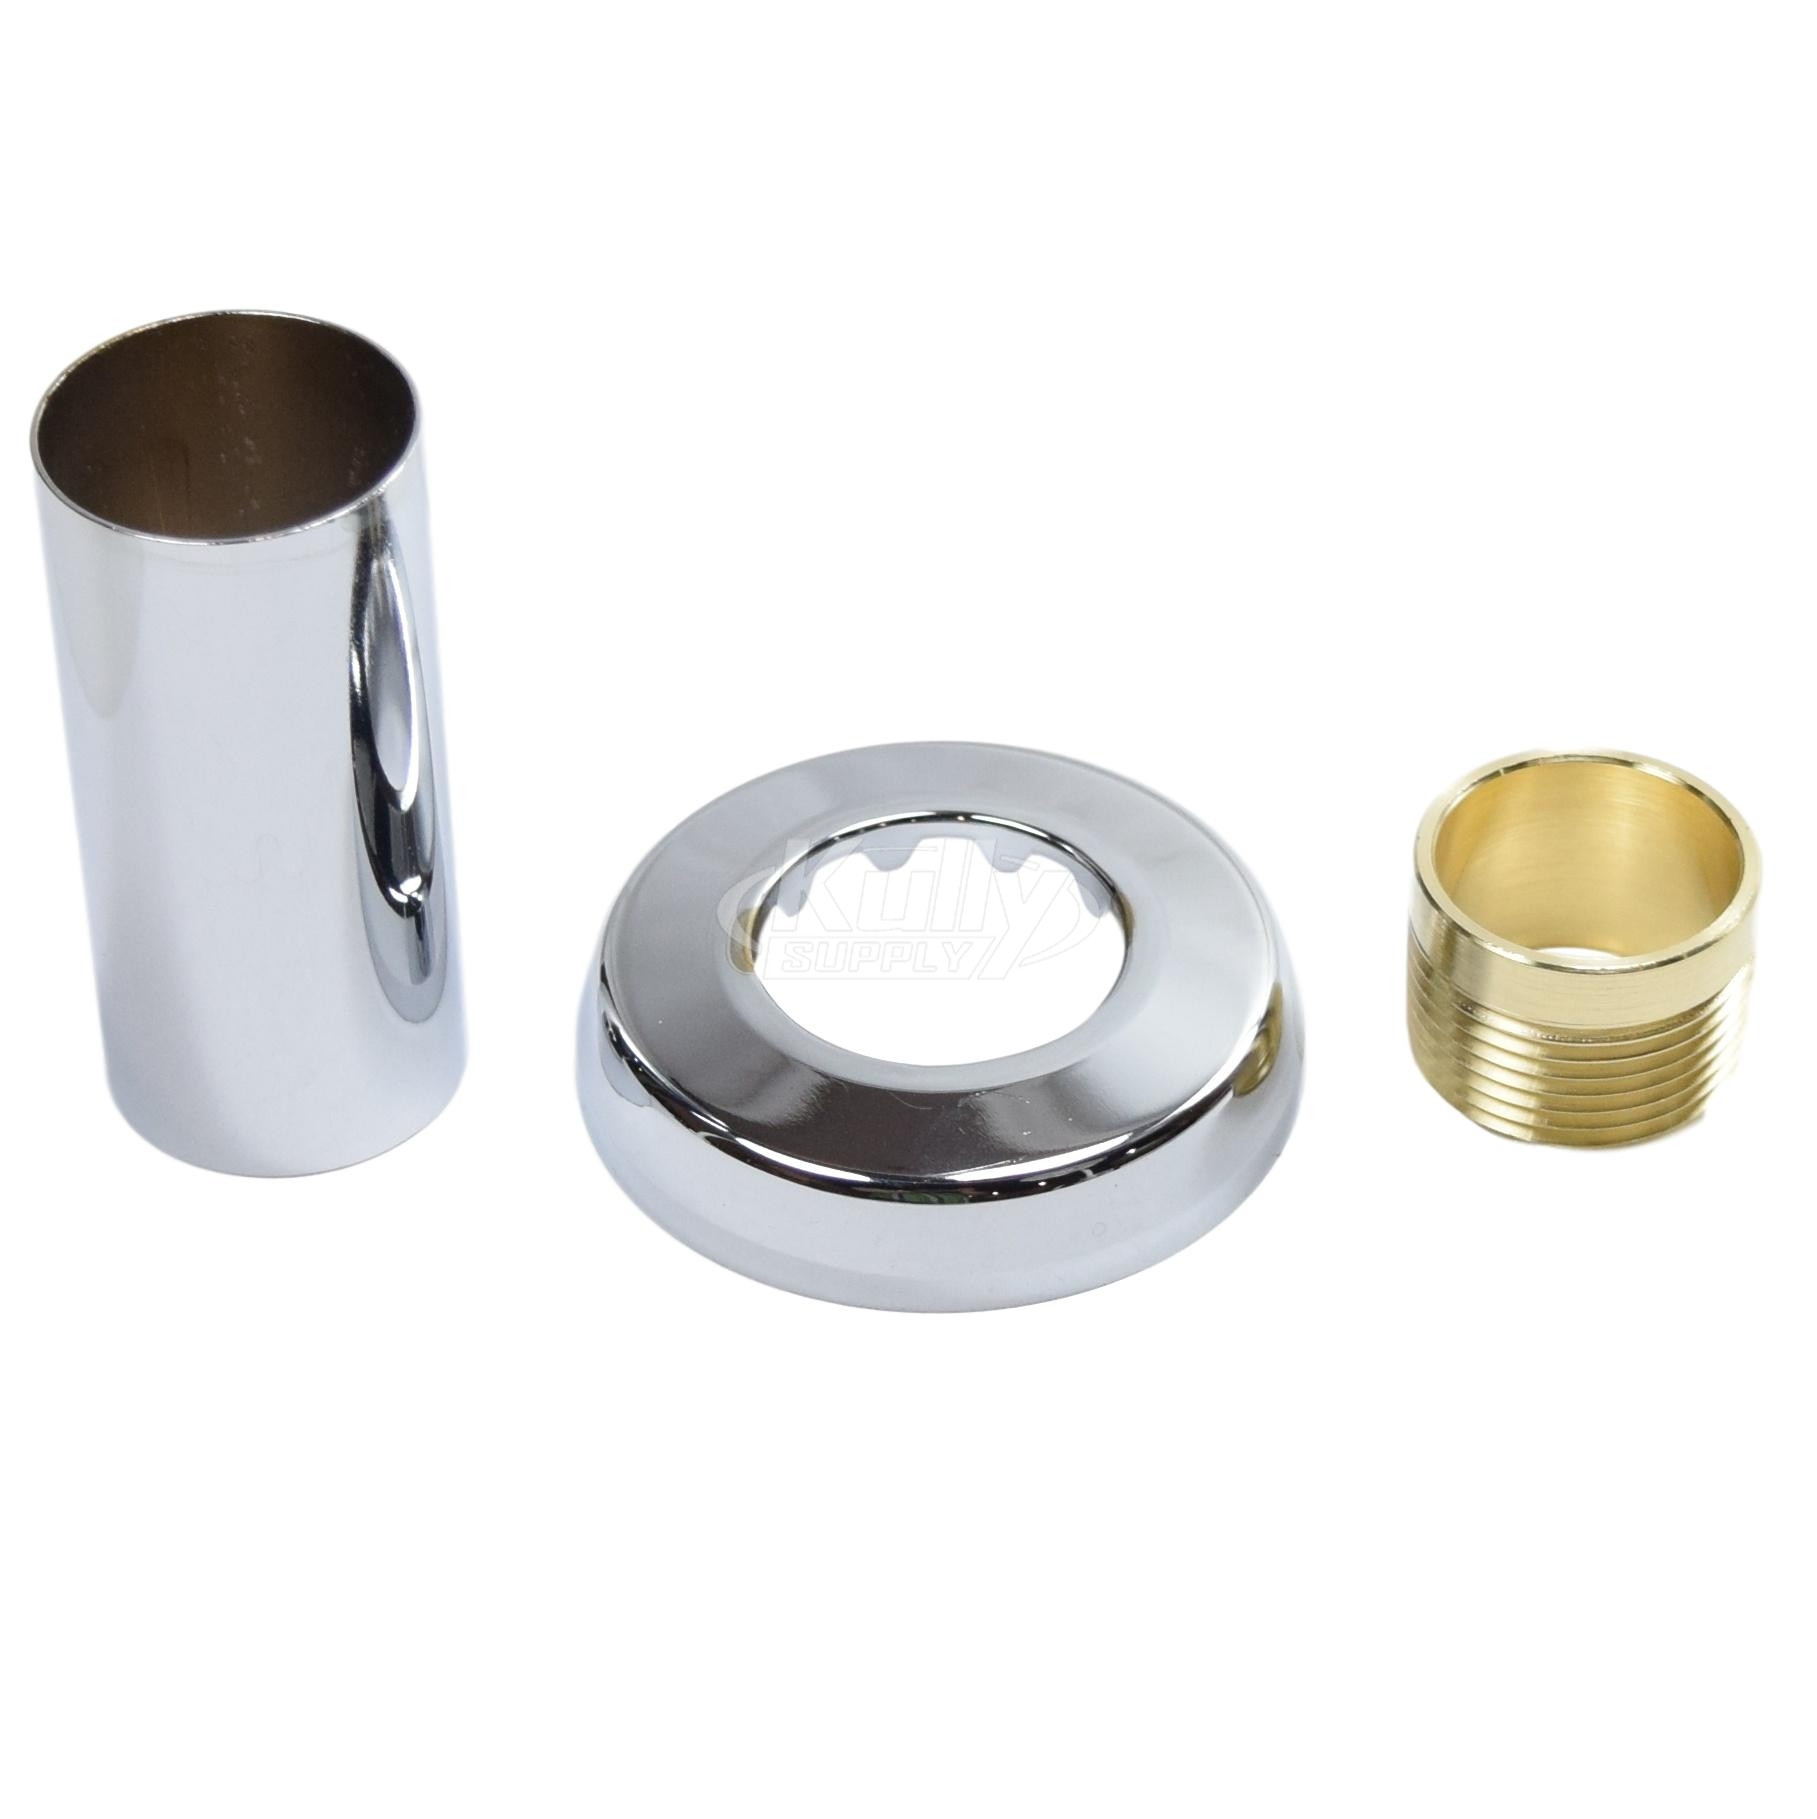 Sloan H-533-AS Sweat Solder Adapter Kit (with Stamped Wall Flange for 1" Urinal Supply)